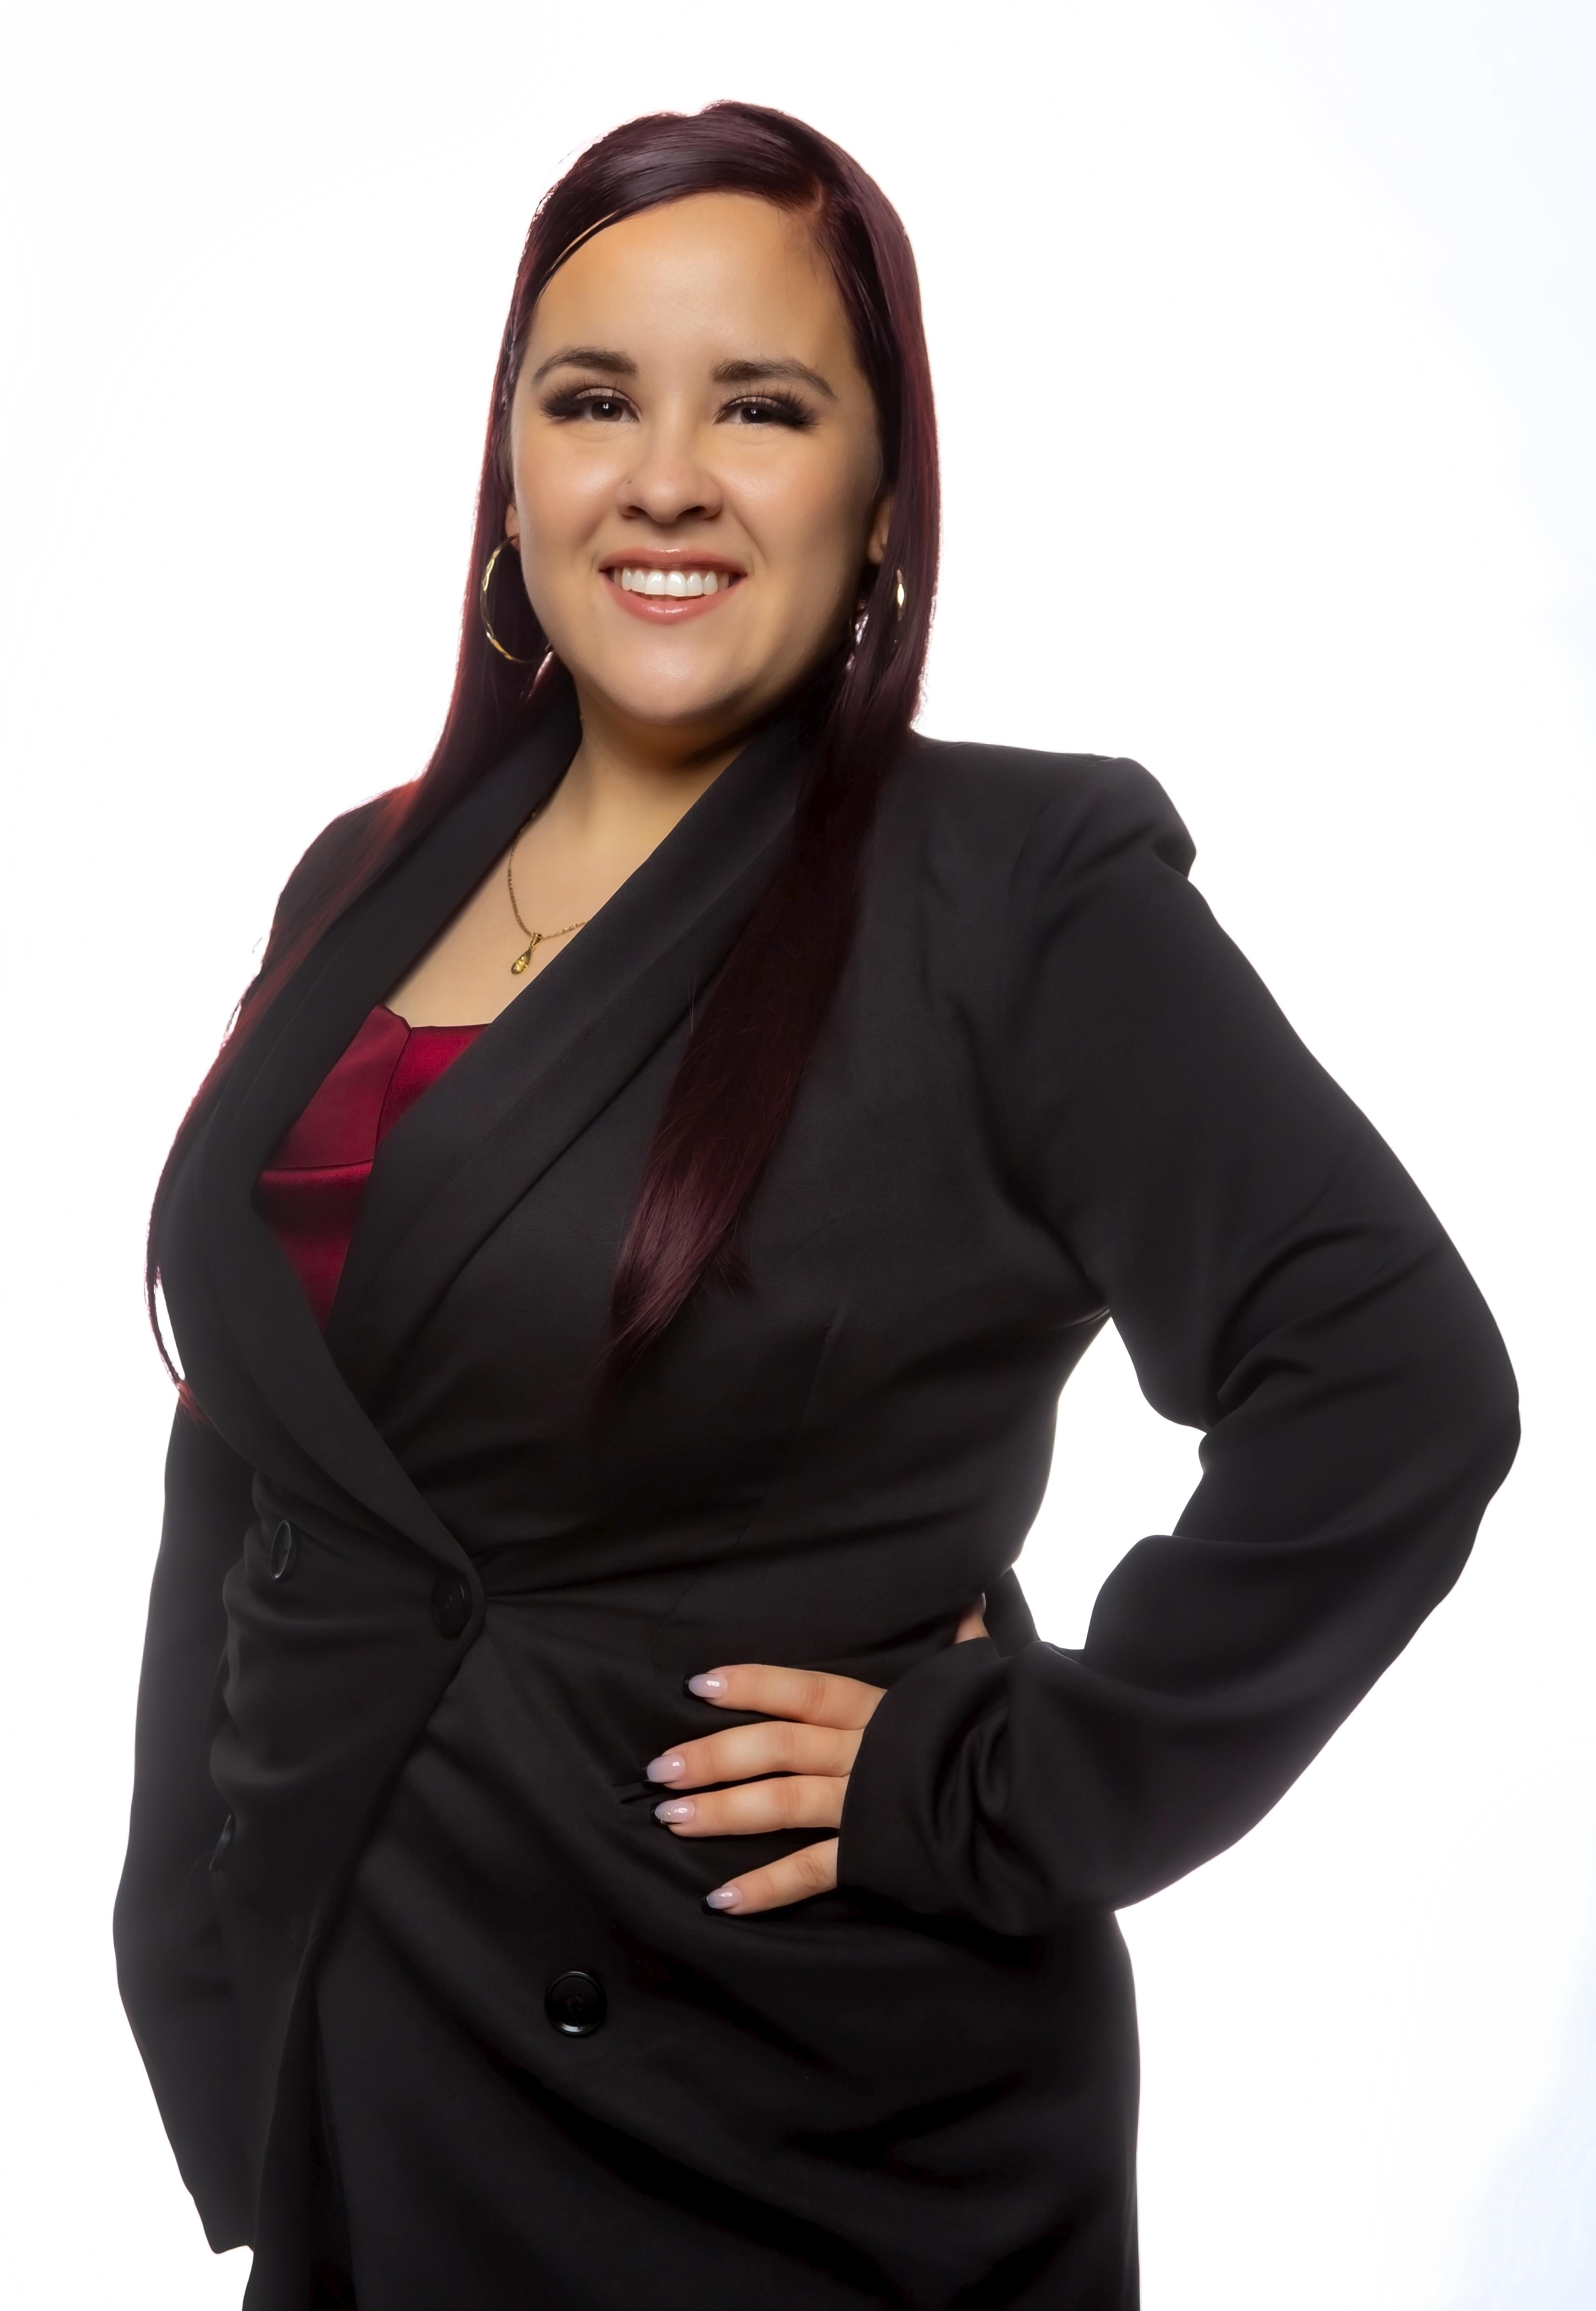 Crystal Cervantes NGFCU Business Development and Branch Operations Specialist